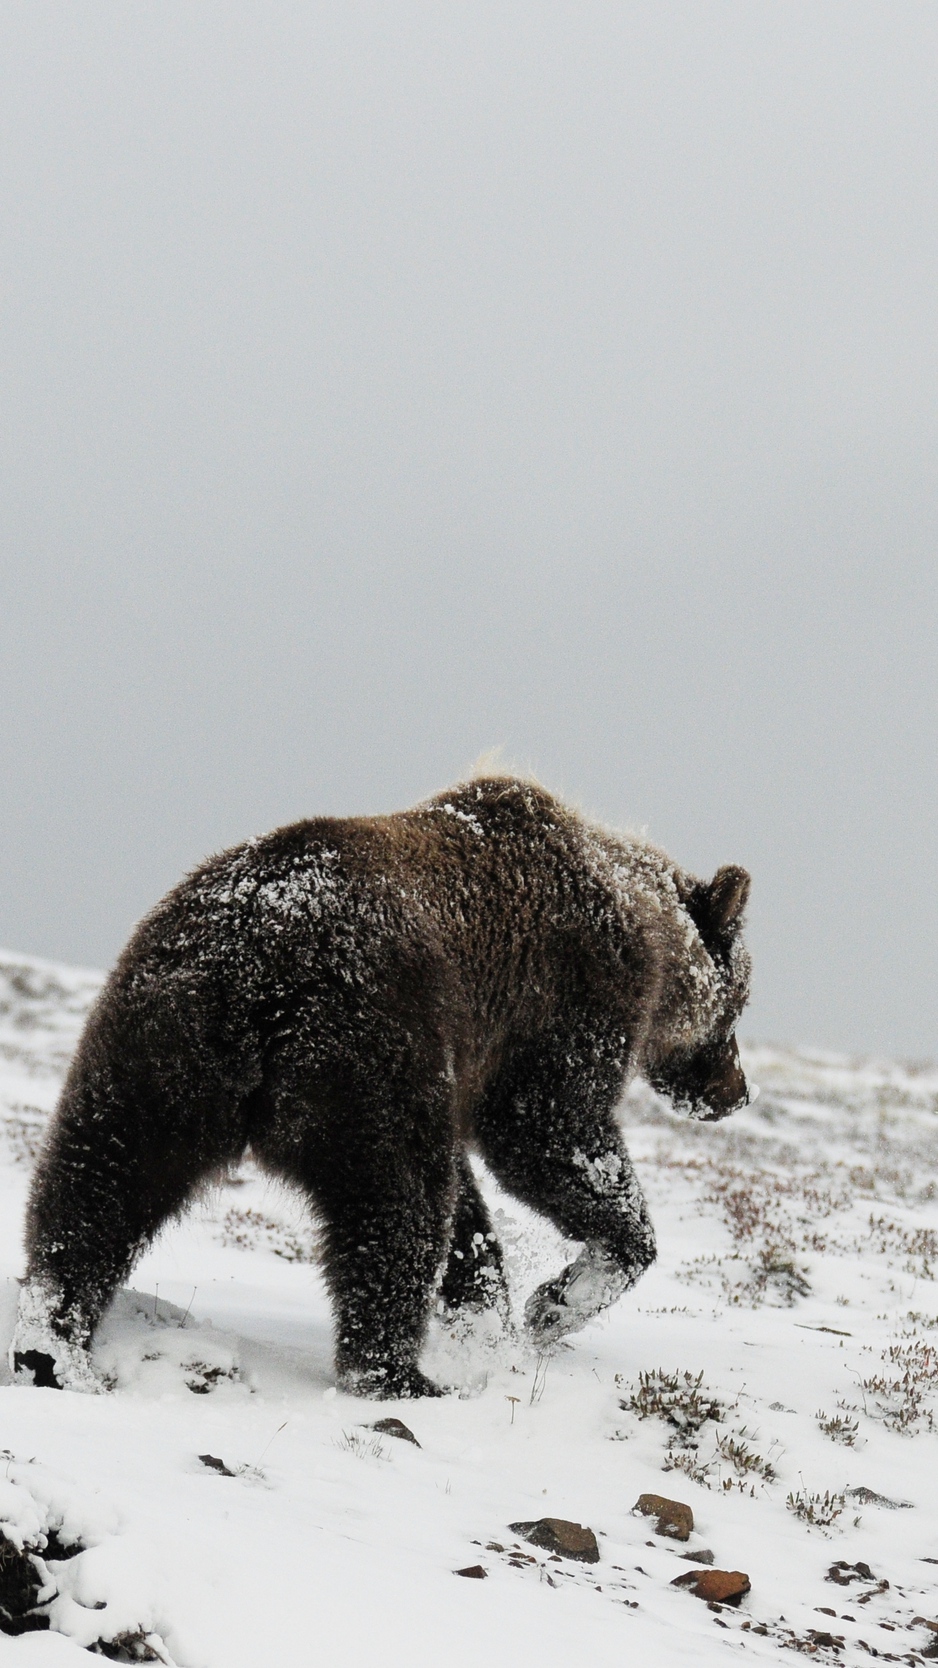 Wallpaper Bear, Grizzly, Winter, Snow, North - Snow Grizzly Bear 4k - HD Wallpaper 